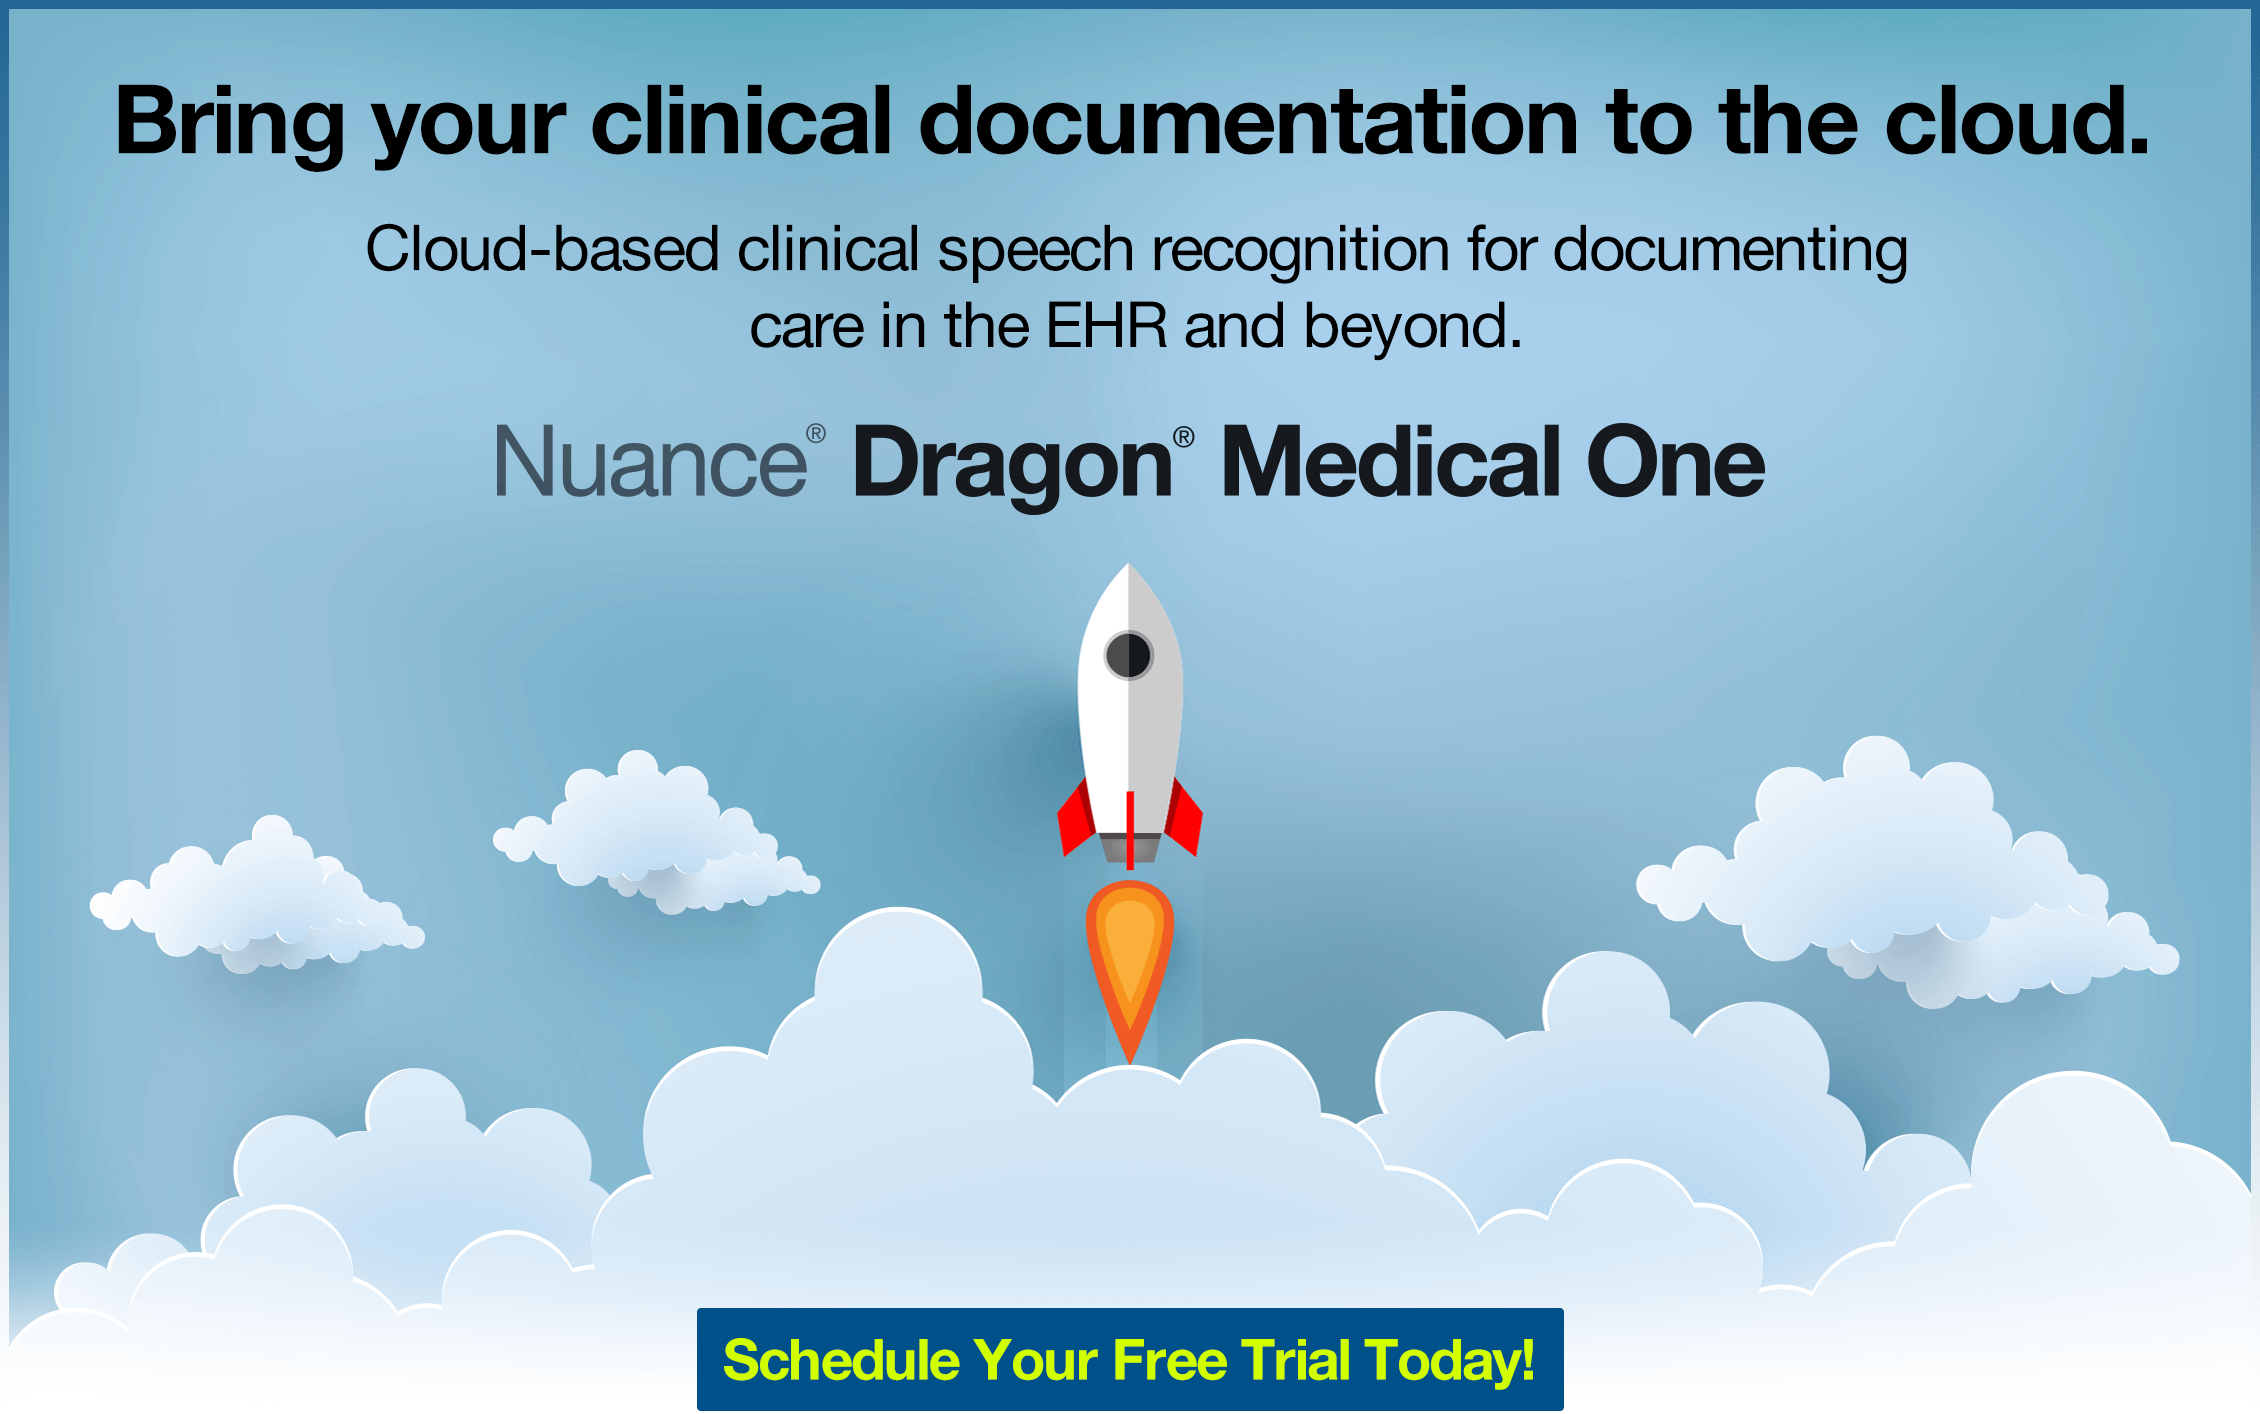 Bring your clinical documentation to the cloud. Cloud-based clinical speech recognition for documenting care in the EHR and beyond.